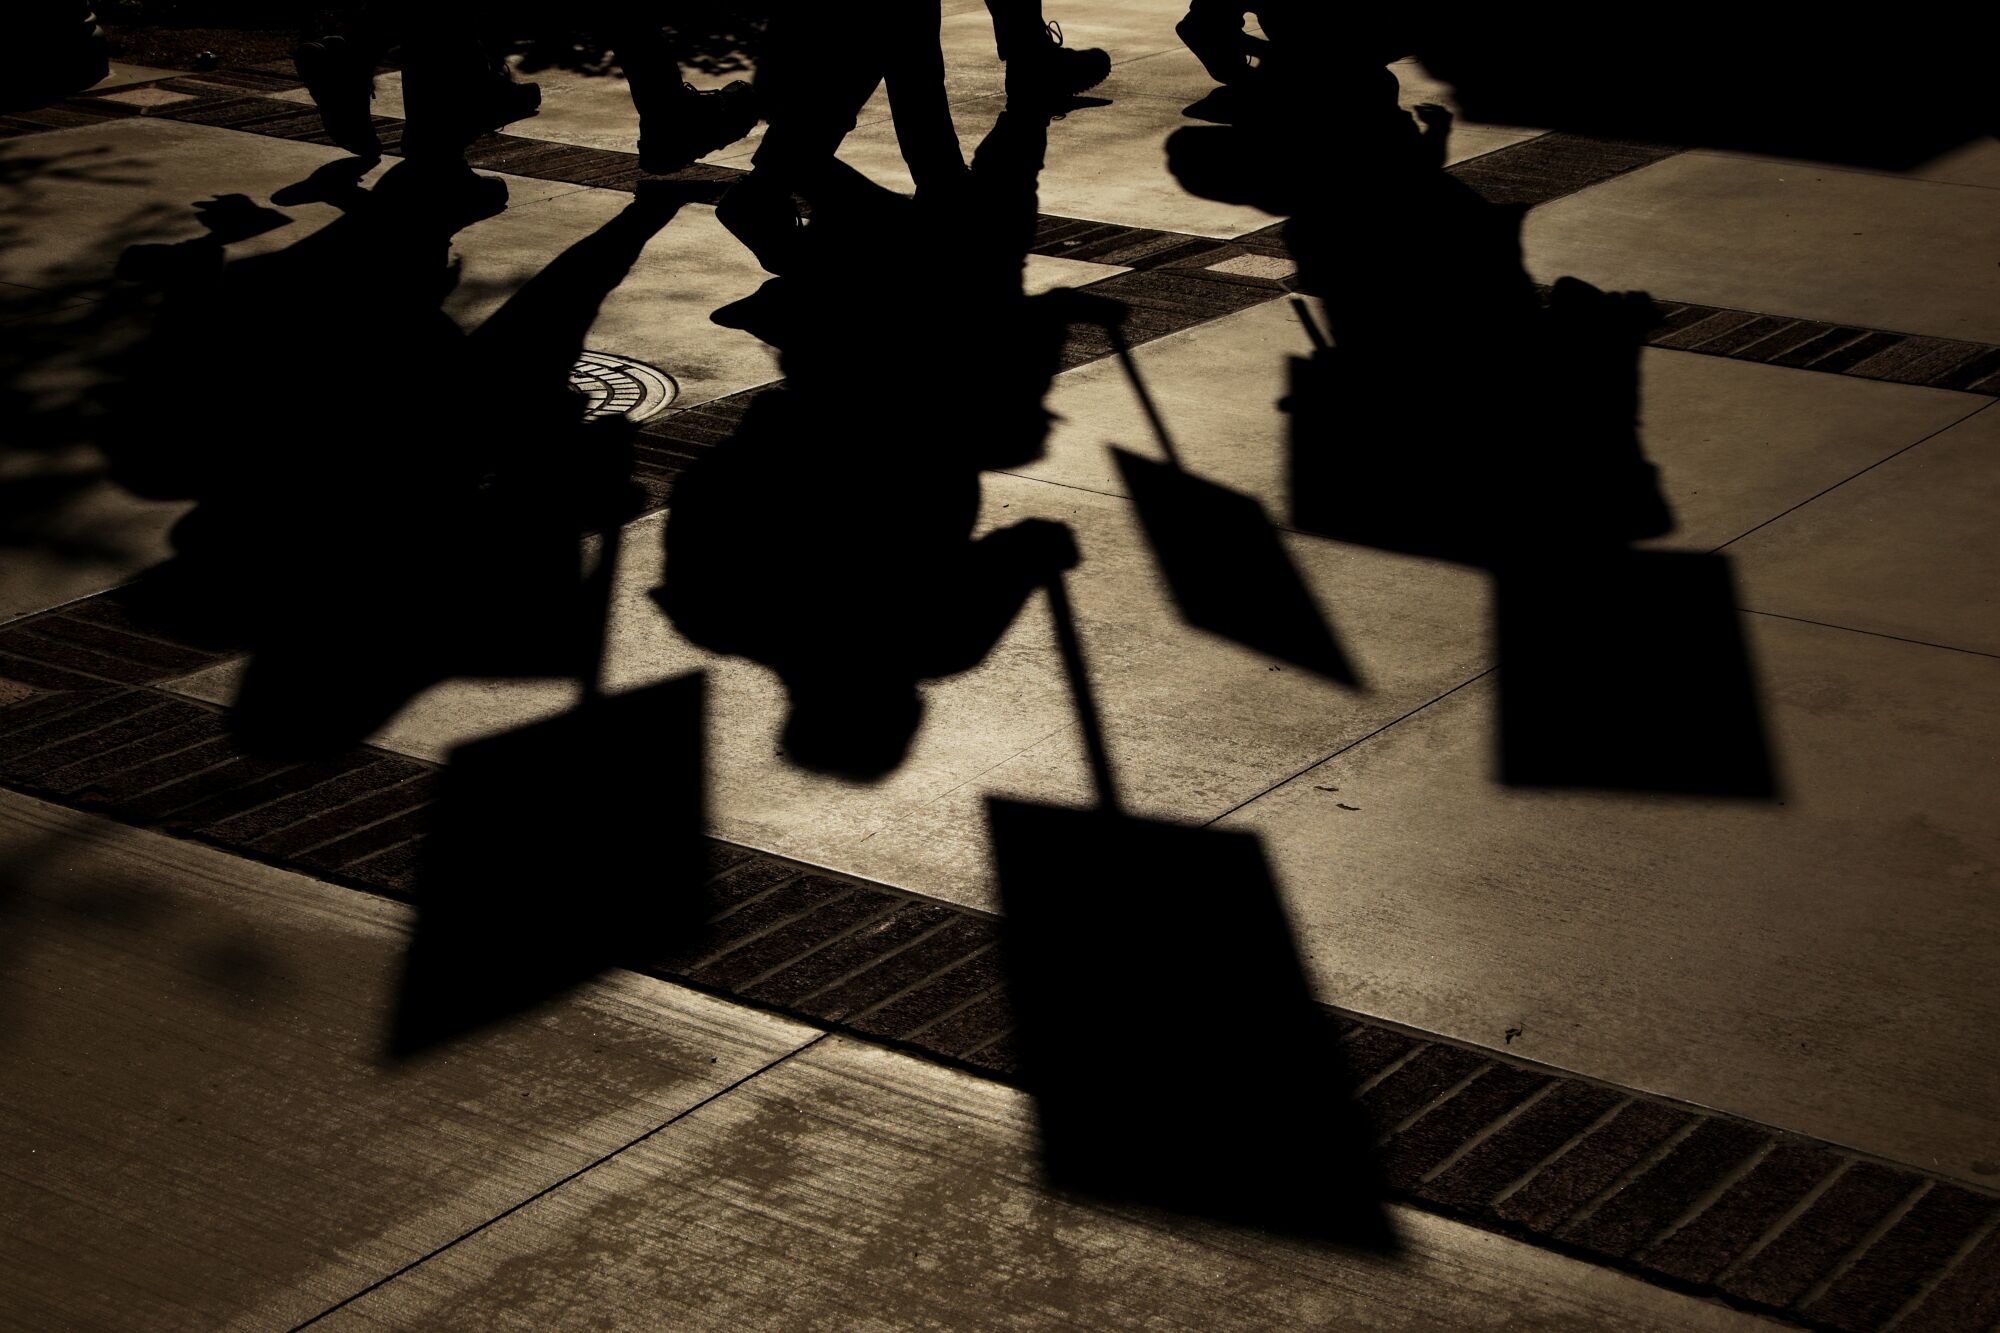 Shadows of demonstrators are seen on pavement while they picket at UCLA.